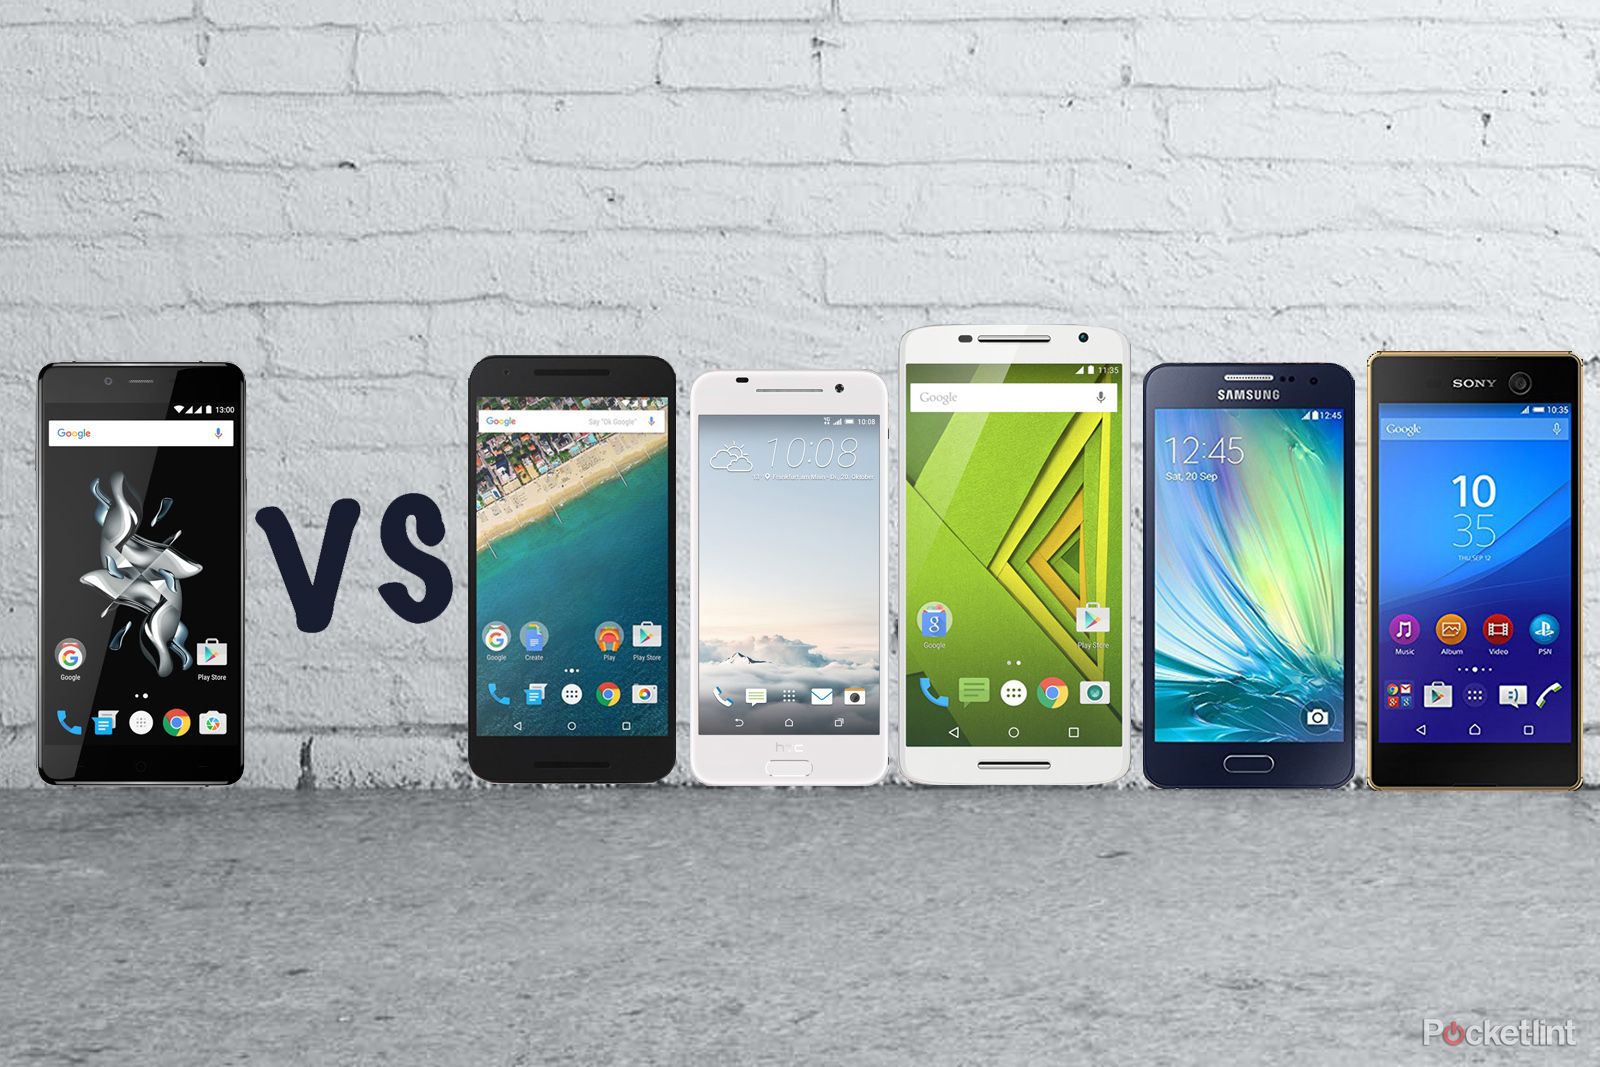 oneplus x vs nexus 5x one a9 moto x play galaxy a5 xperia m5 what s the difference image 1